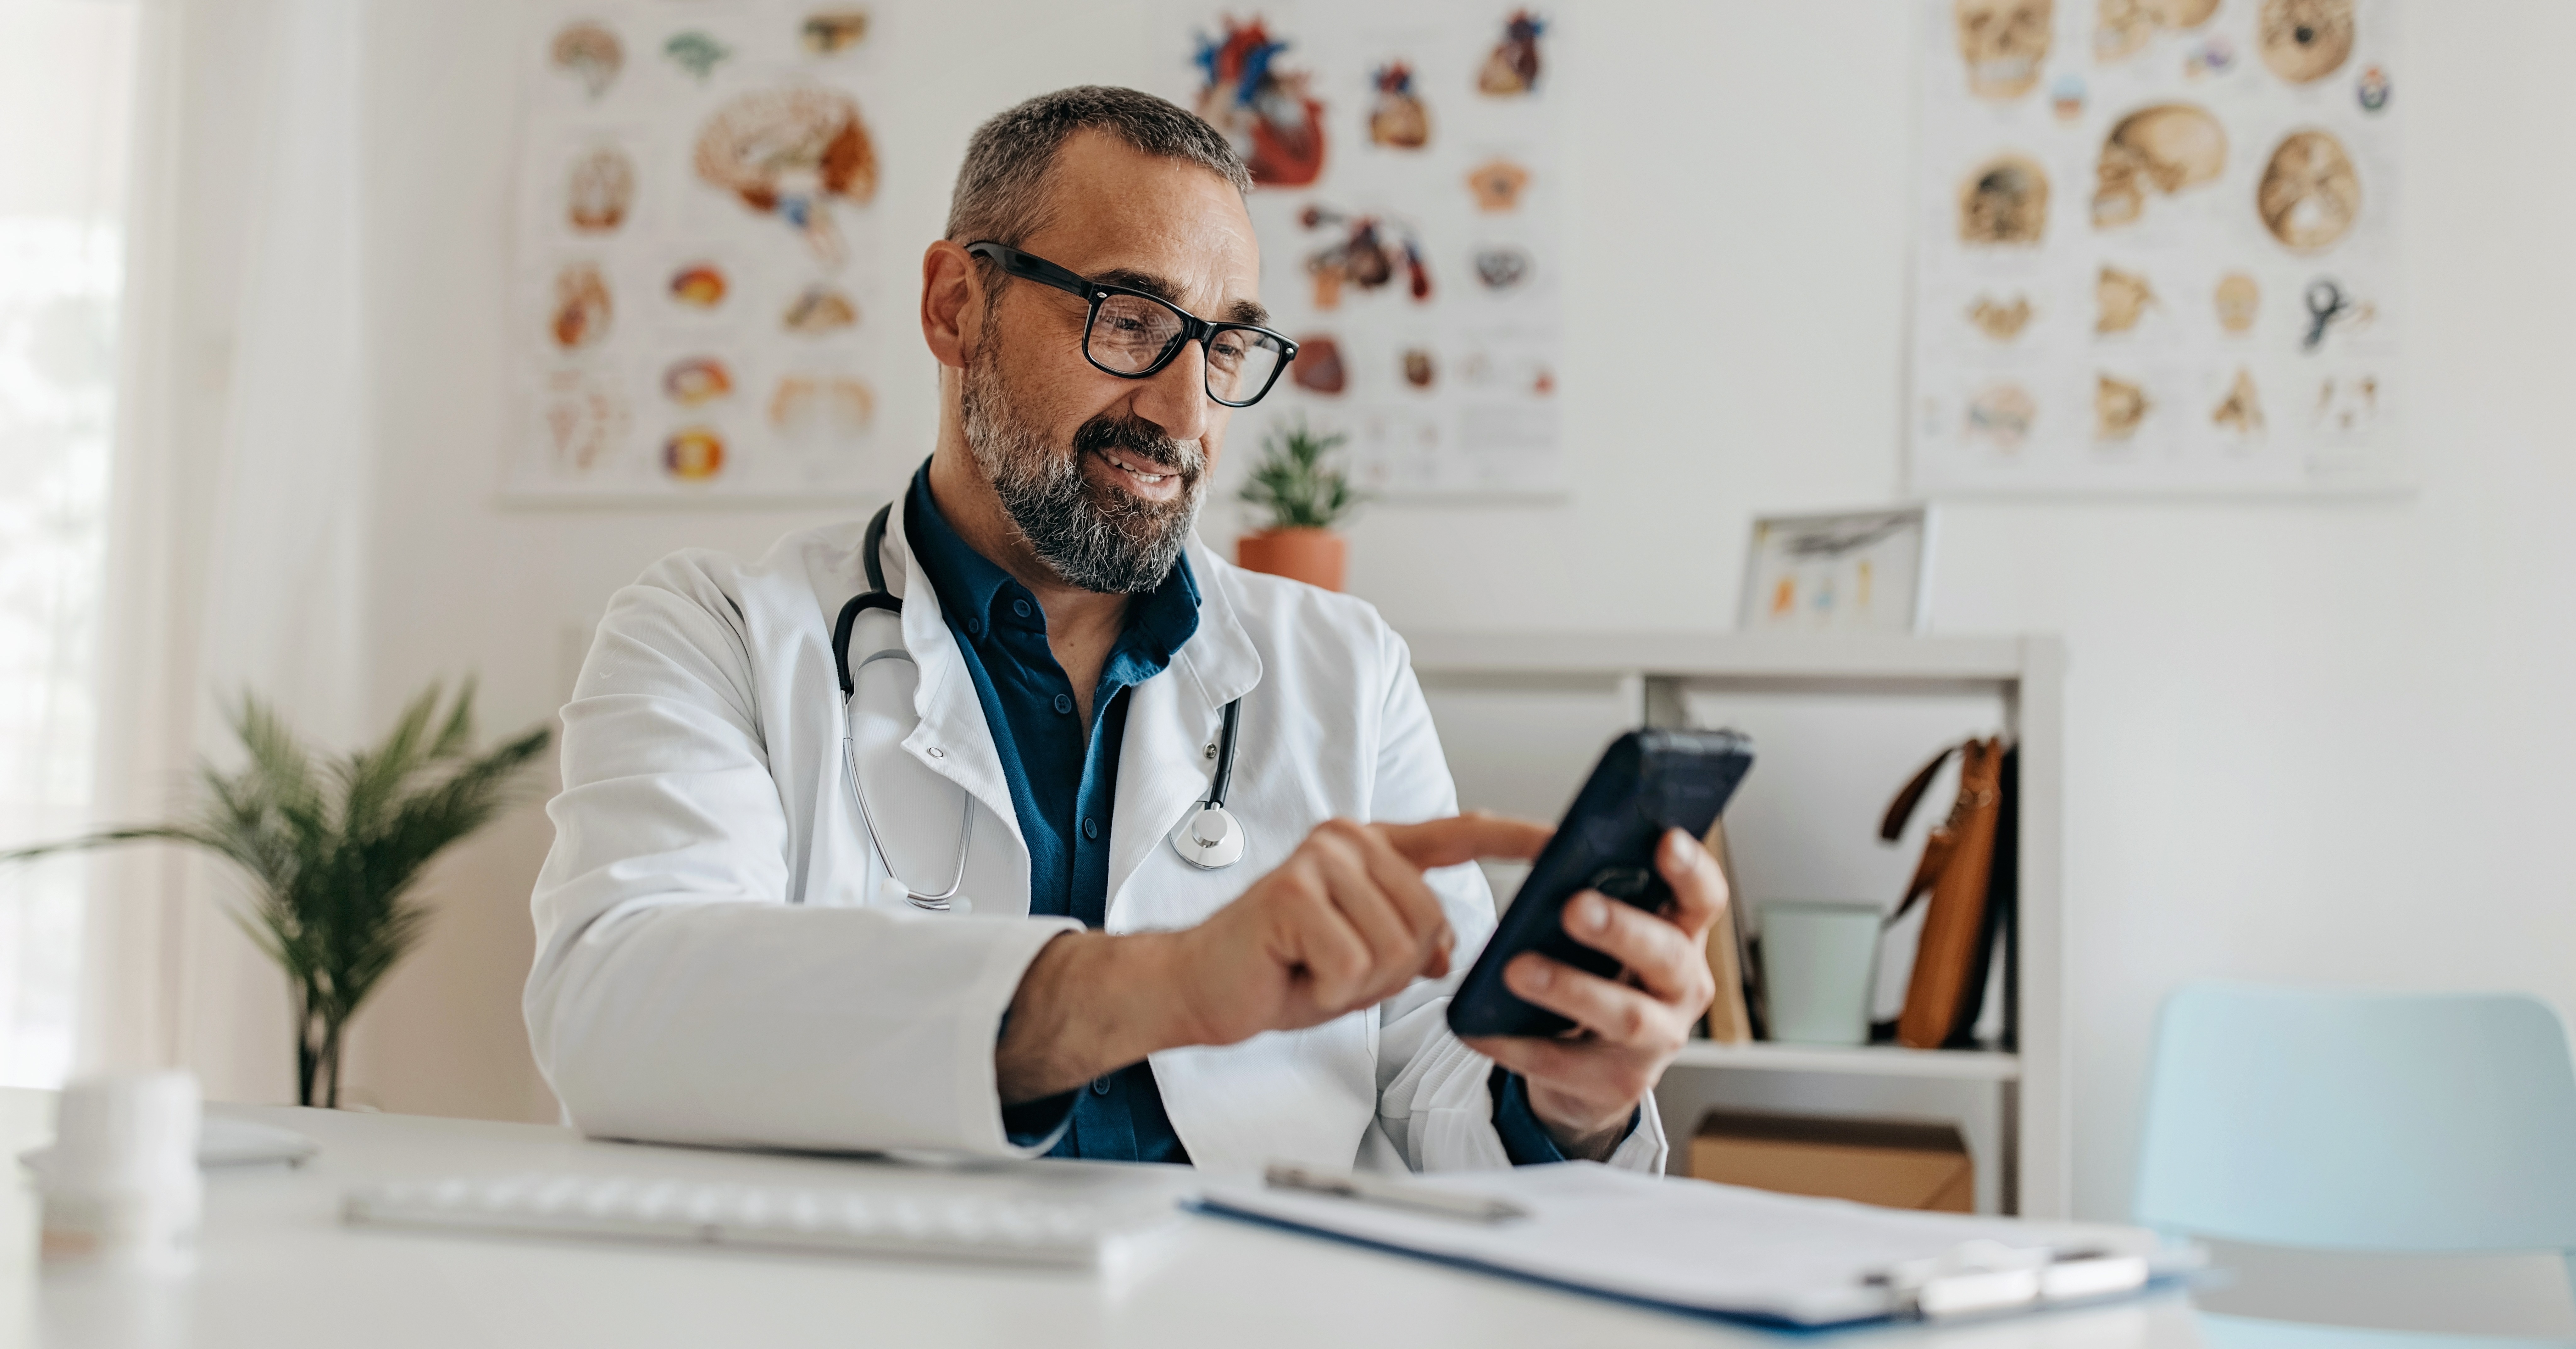 Physician uses his smartphone